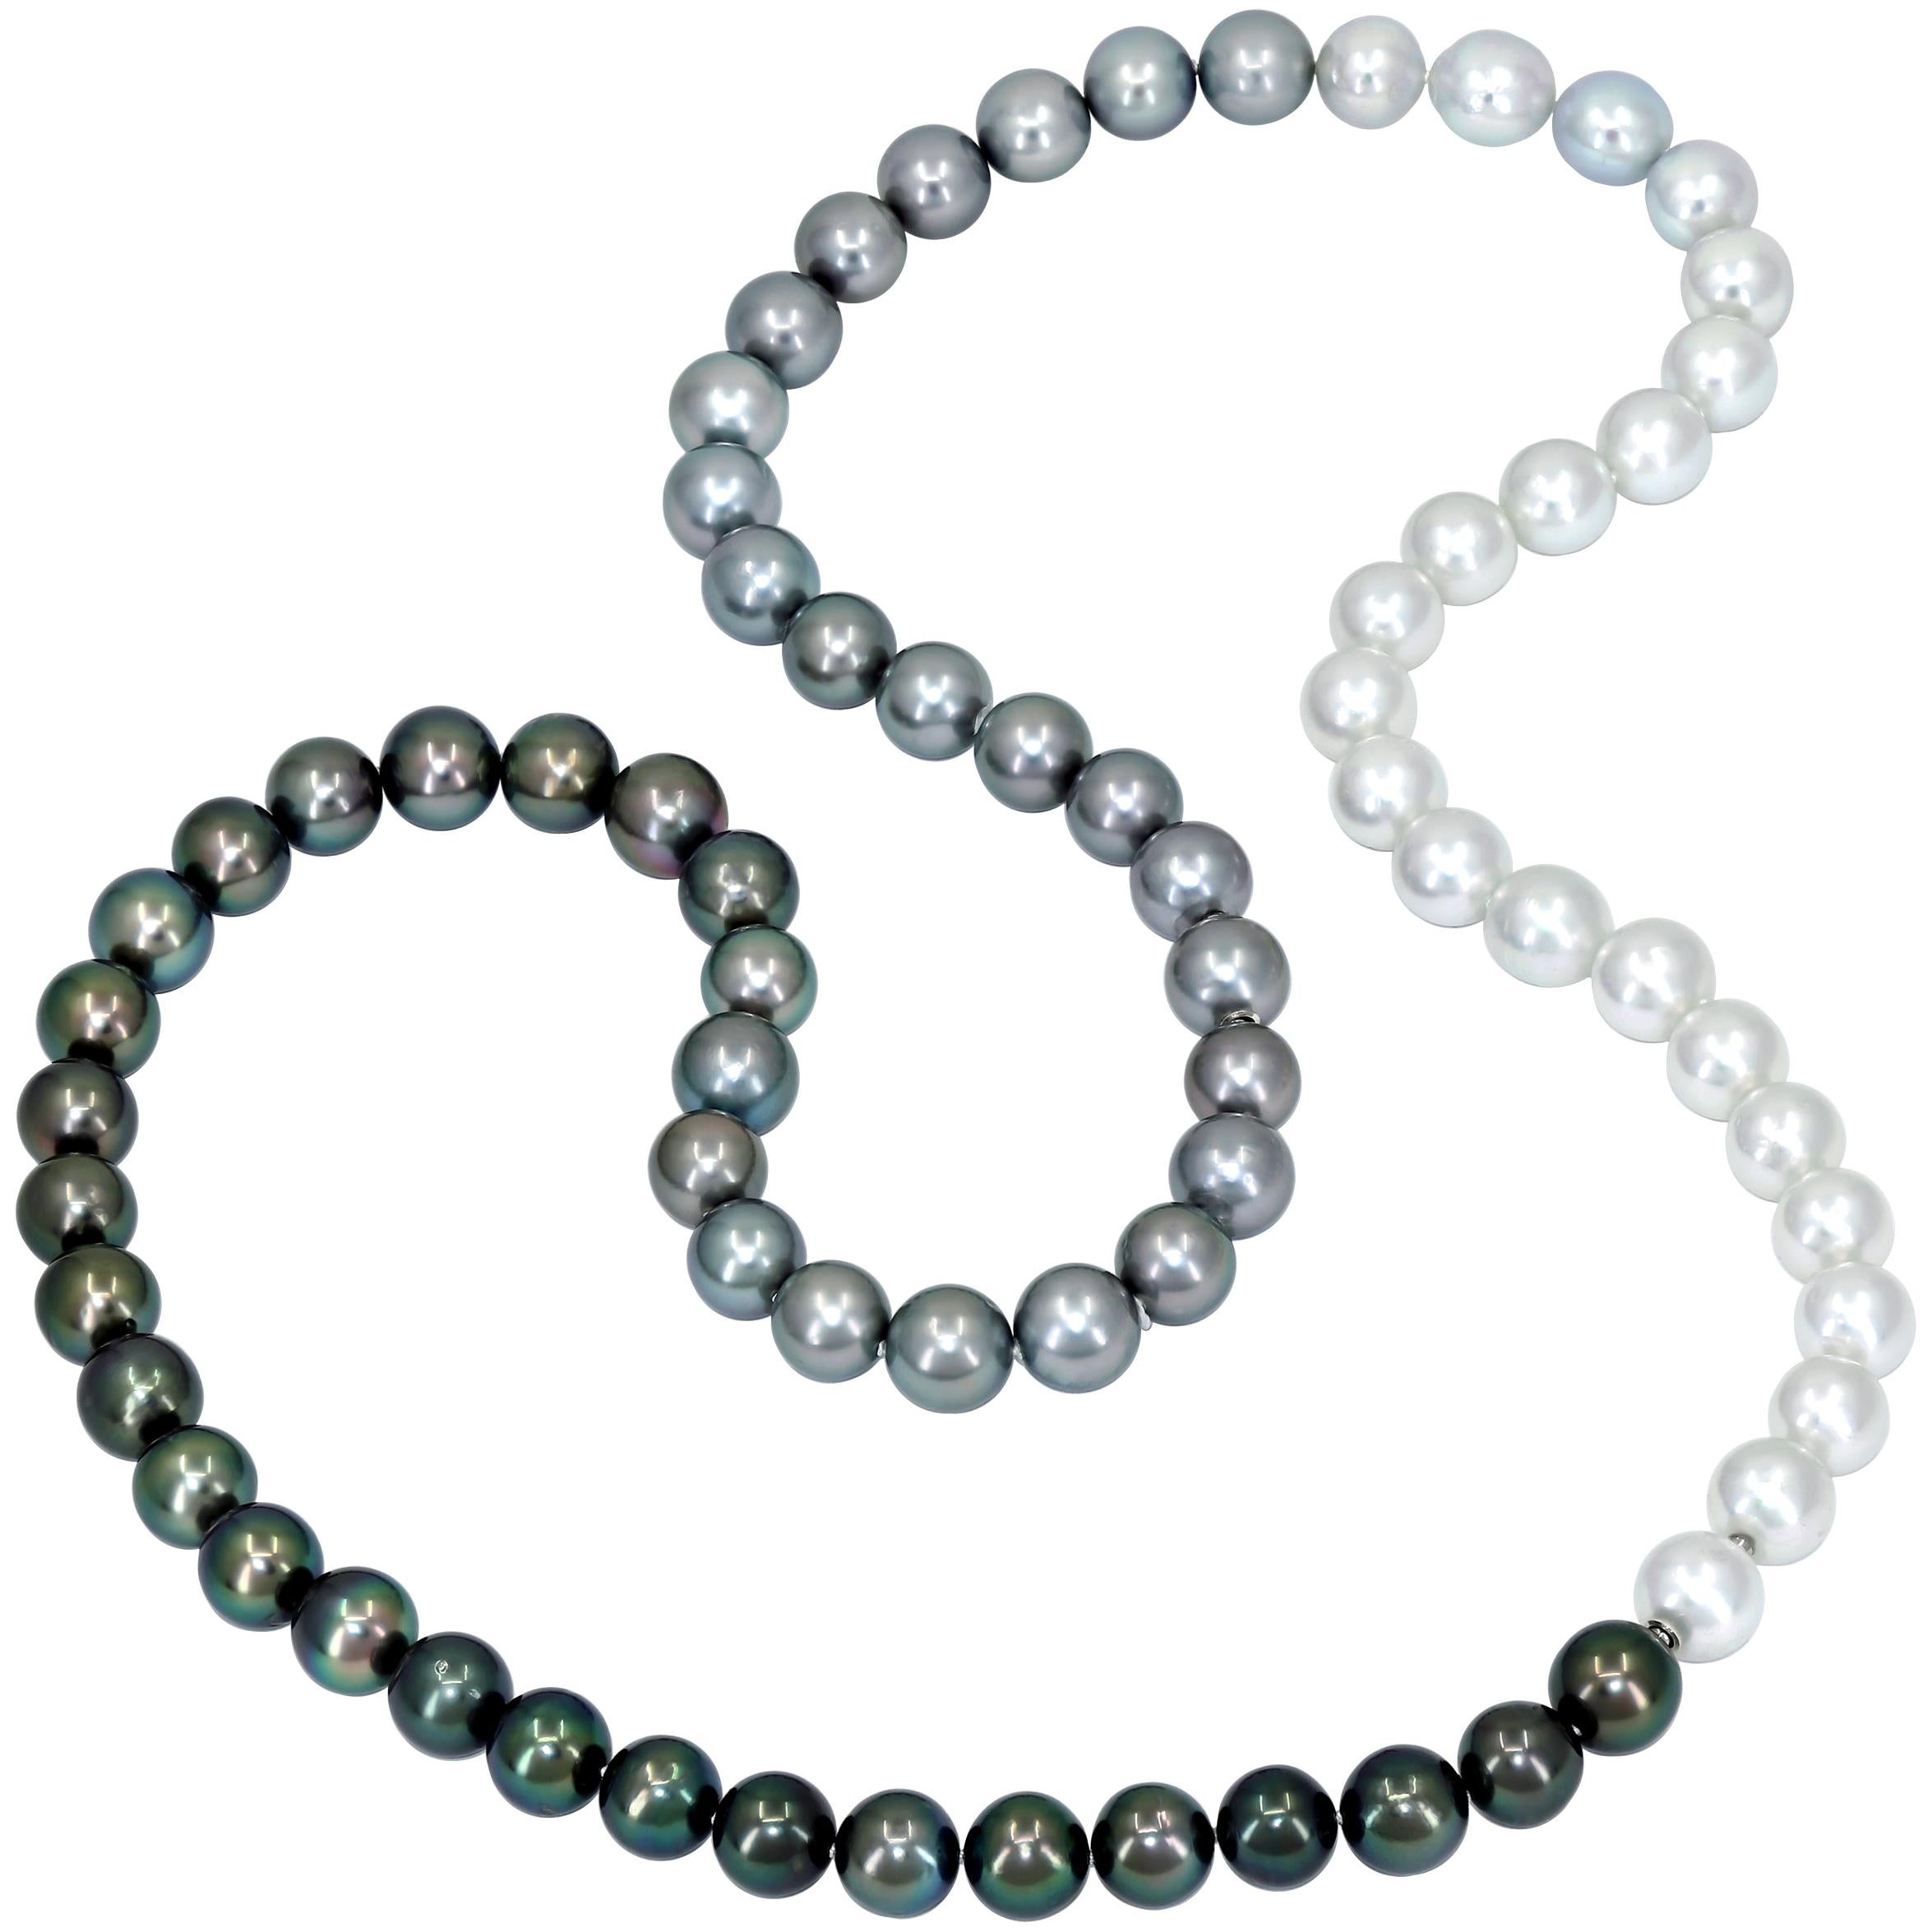 Atelier Zobel Ombré Tahitian and South Sea Pearl Multilength Necklaces